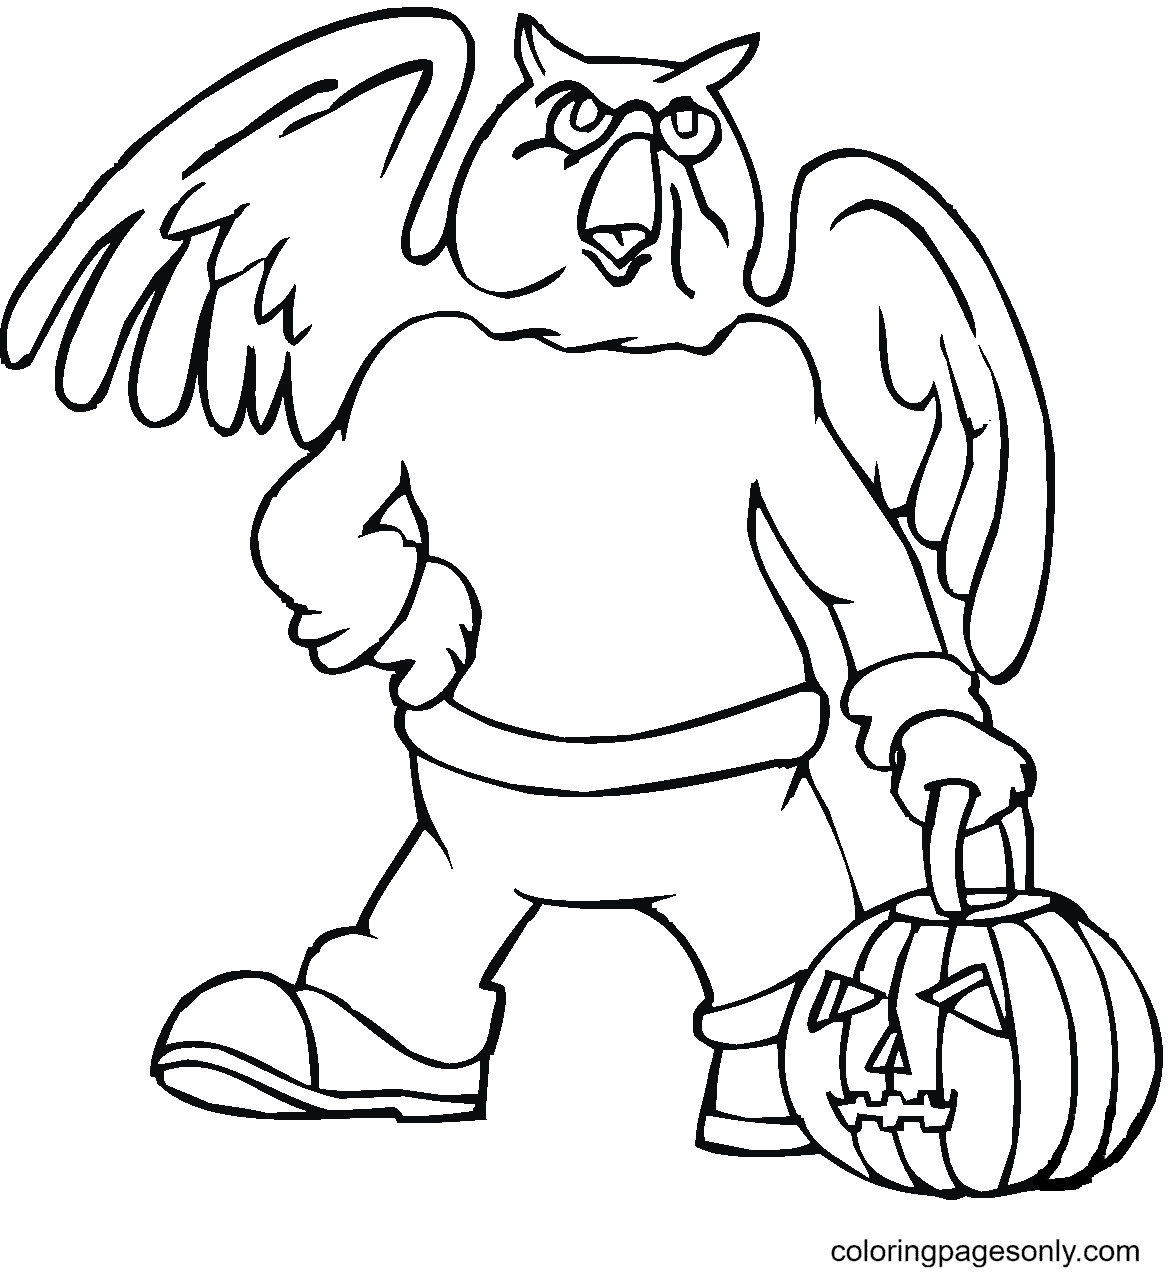 Owl with Pumkin Basket Coloring Page